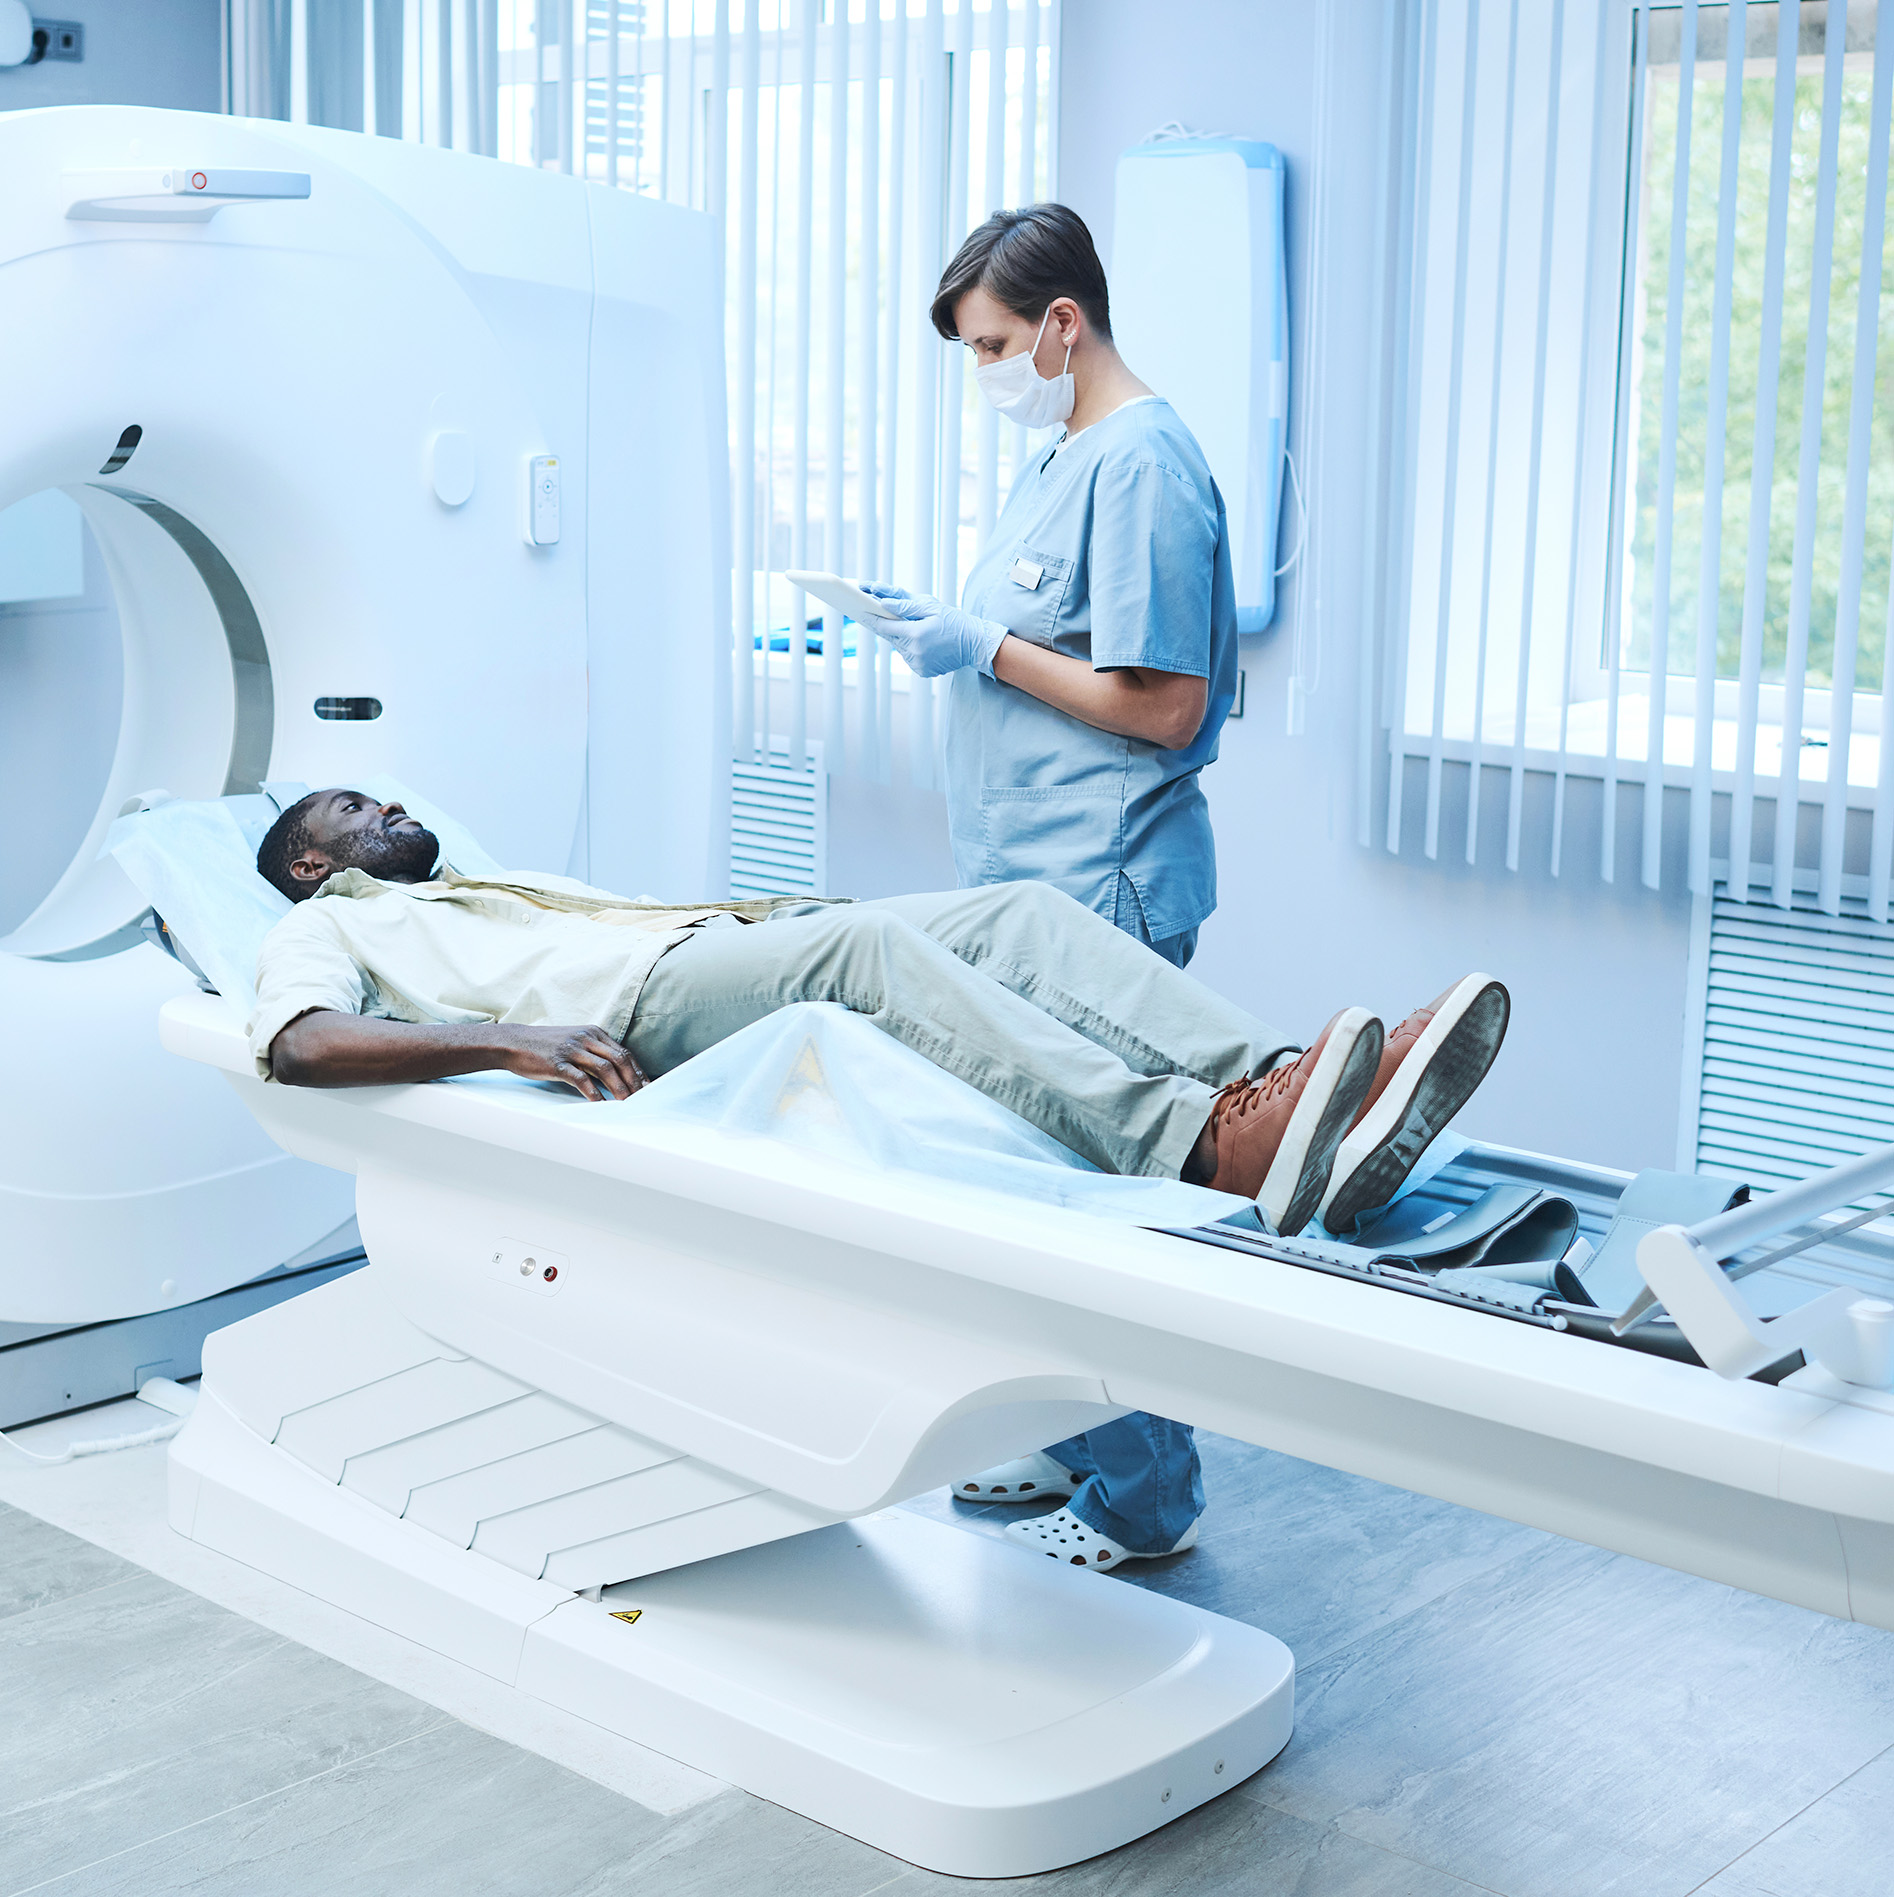 MRI services now available at Vista Medical Center in St. George!